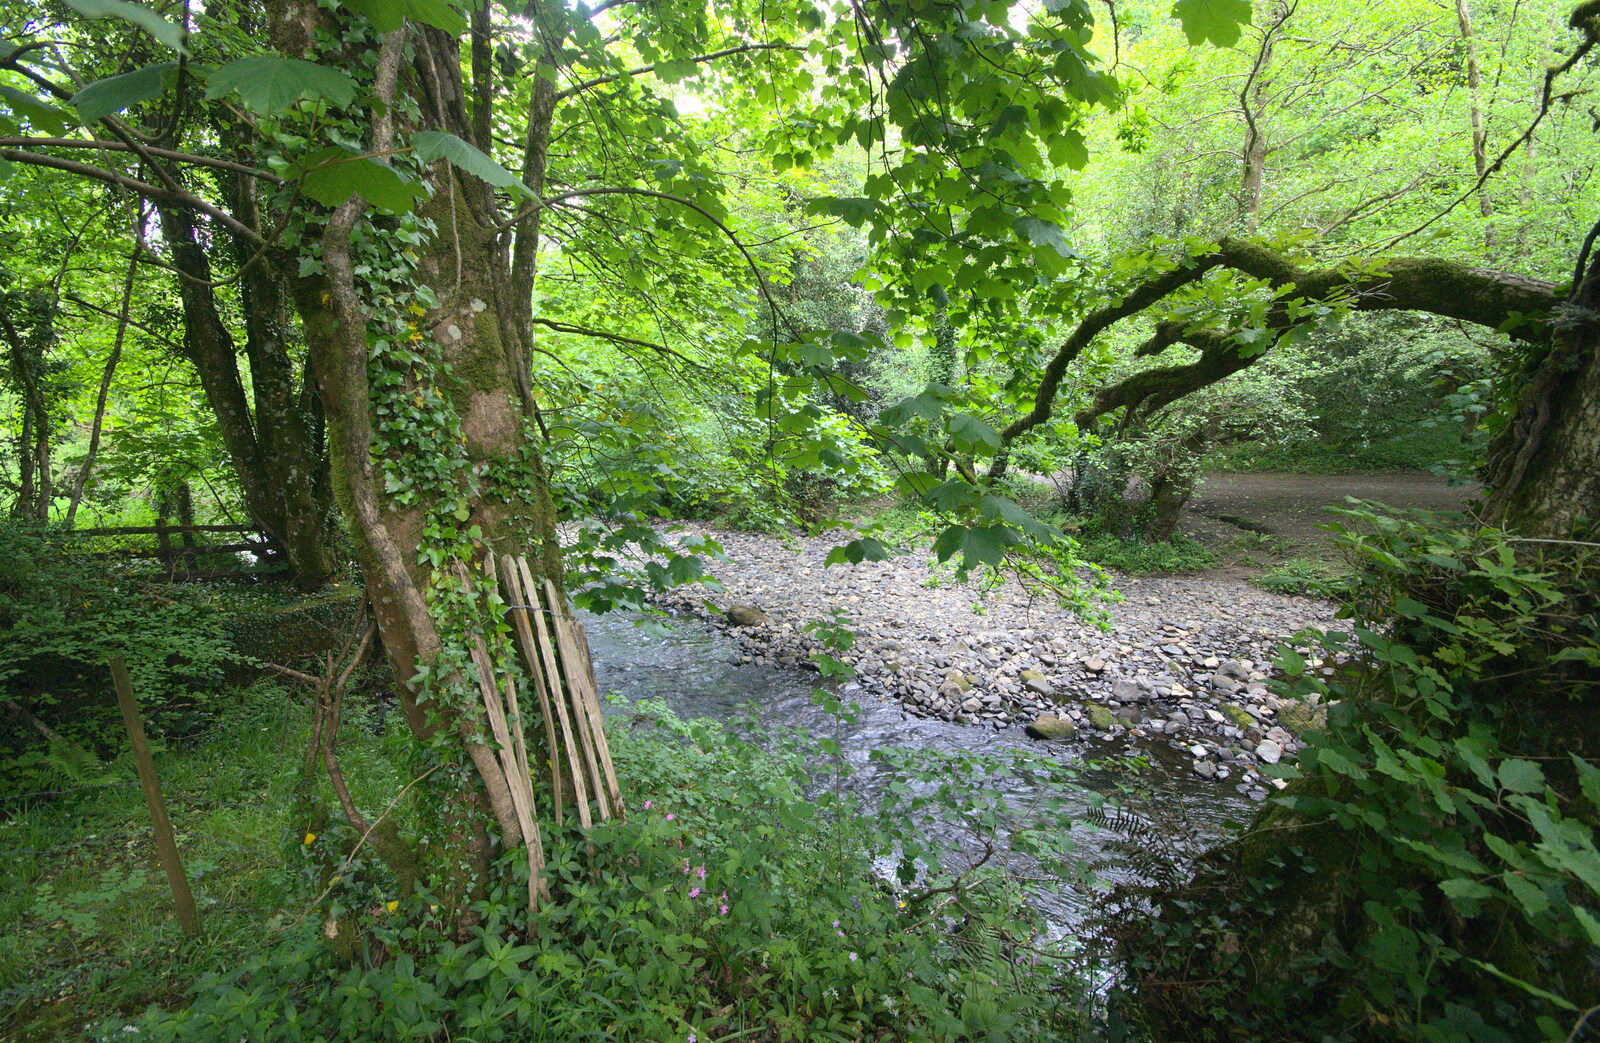 The nearby river from A Visit to Okehampton Castle and Dartmoor, Devon  - 28th May 2016